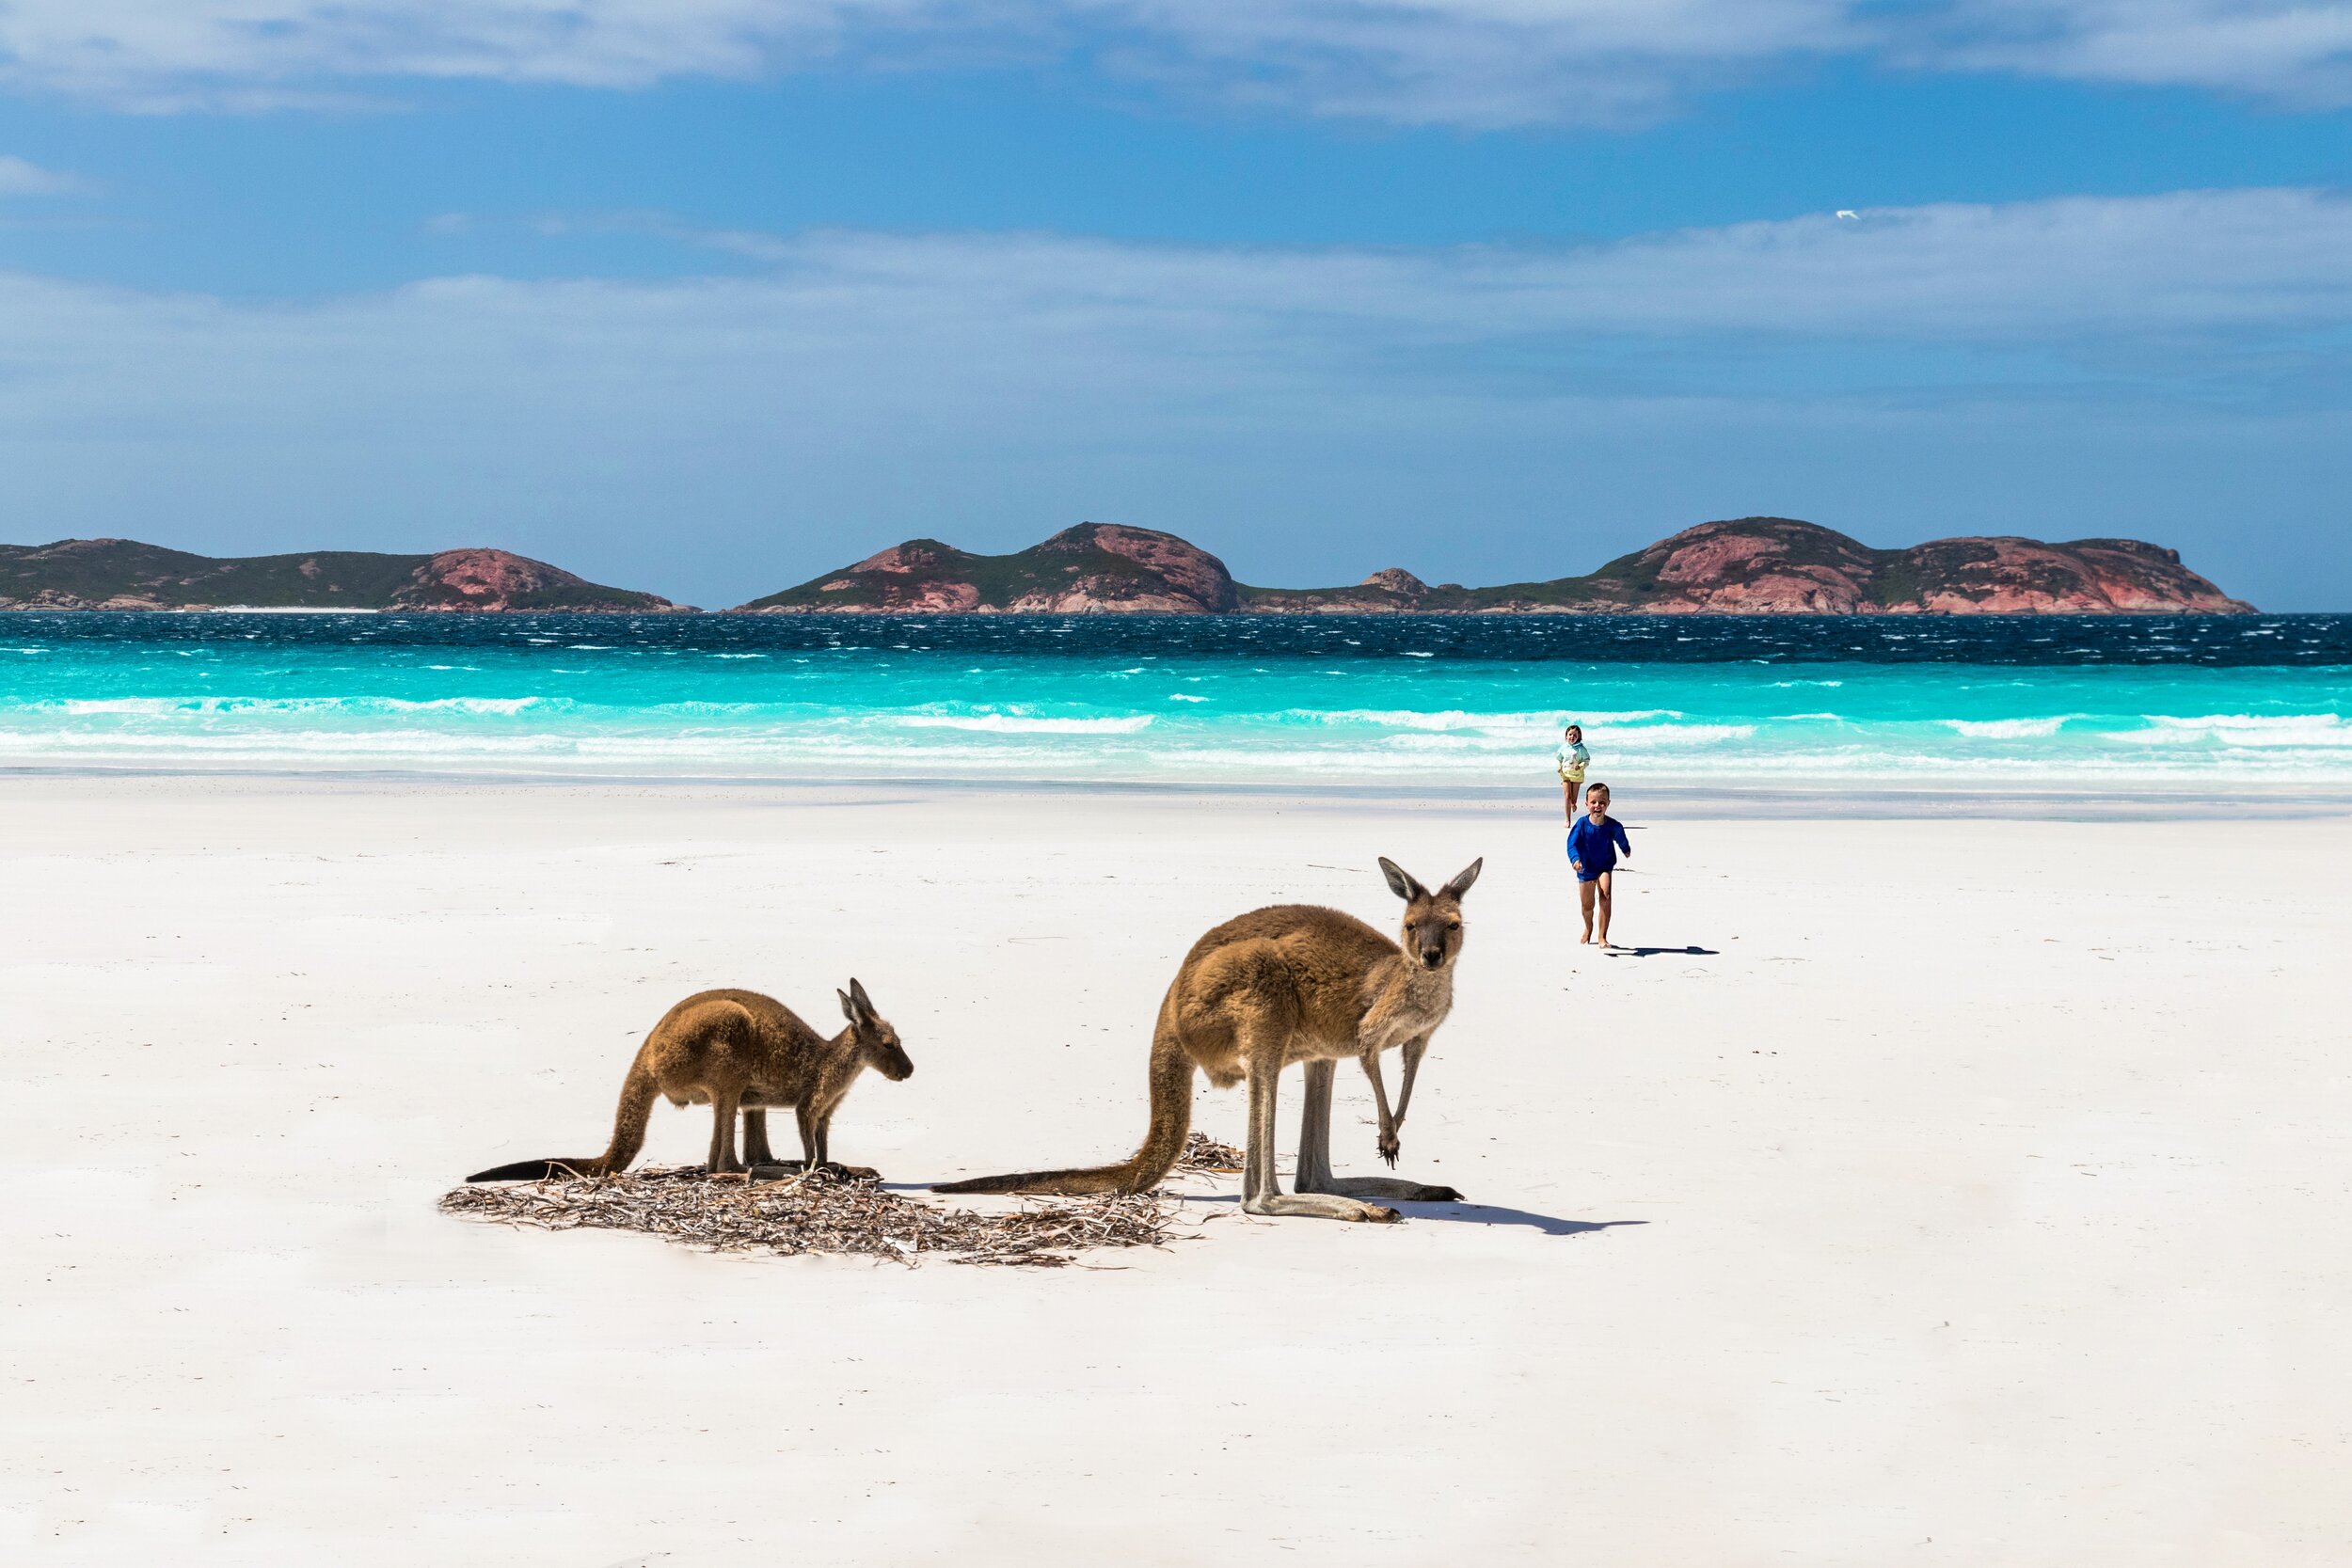 Kangaroo sighting in Esperance , Australia, just another exciting experience for Lulu of 10K Dollar Day 